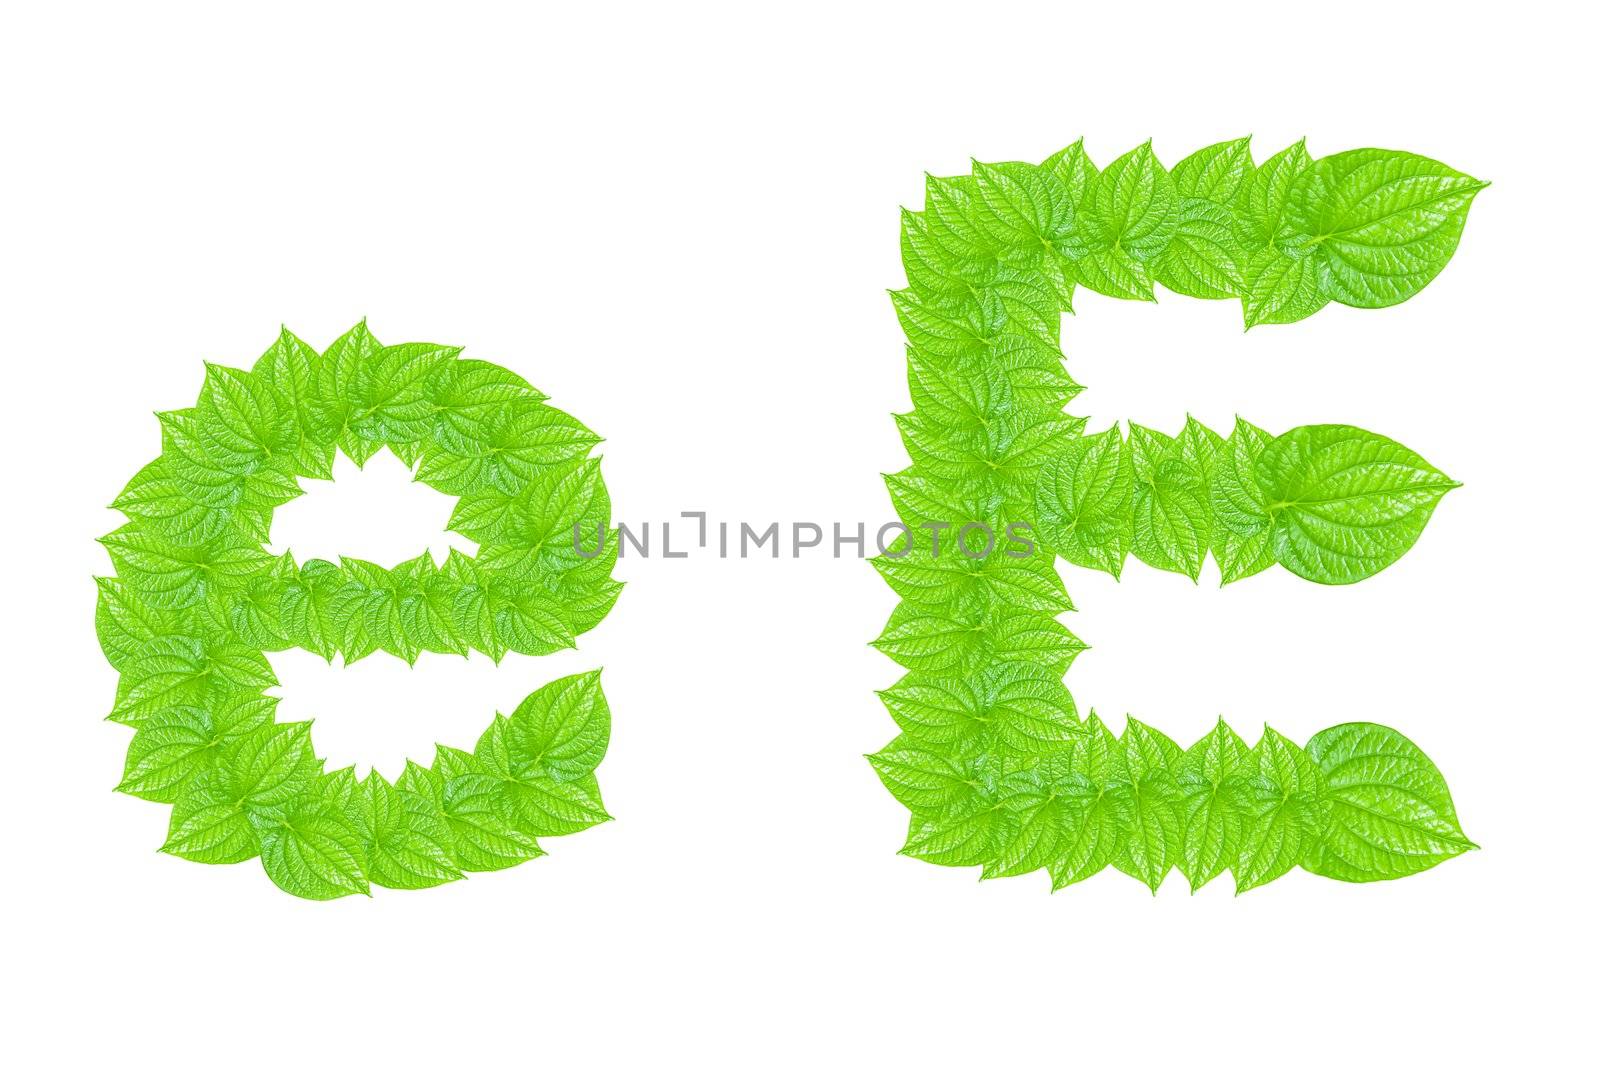 English alphabet made from green leafs with letter E in small capital and large capital letter